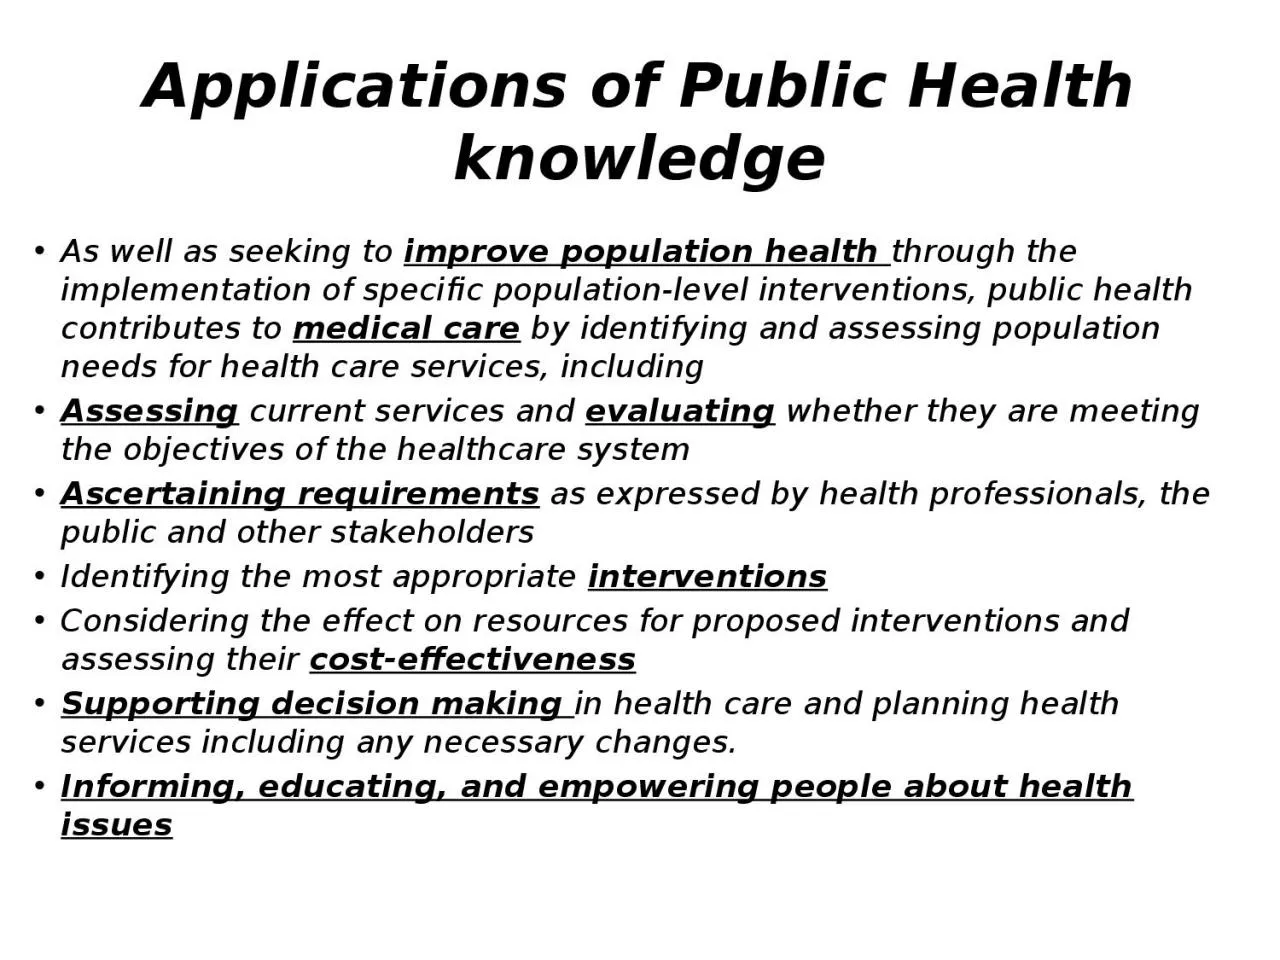 Applications of Public Health knowledge